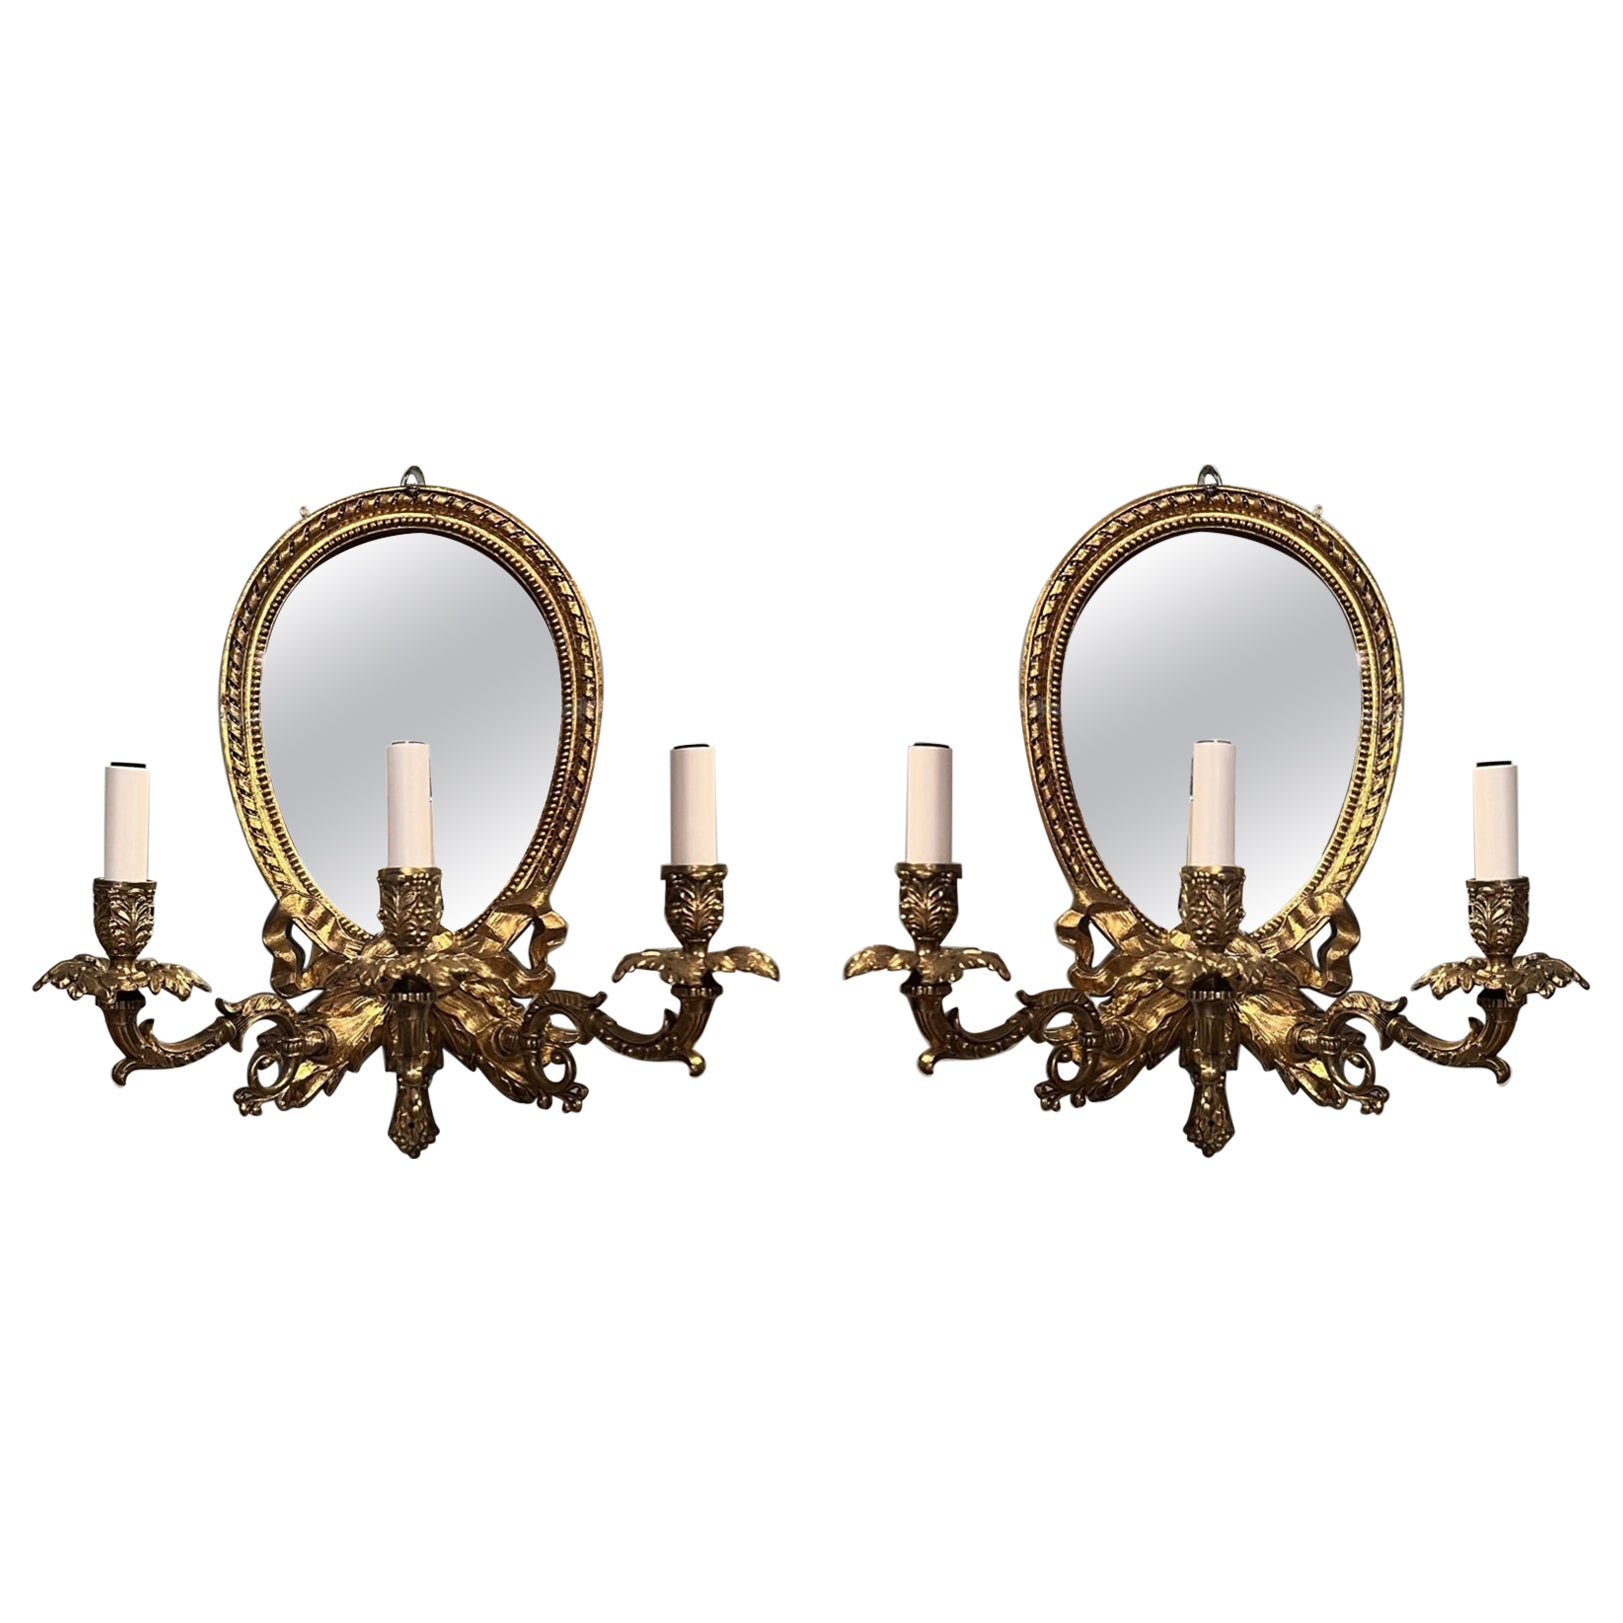 Pair of Antique Mirrored Wall Sconces For Sale